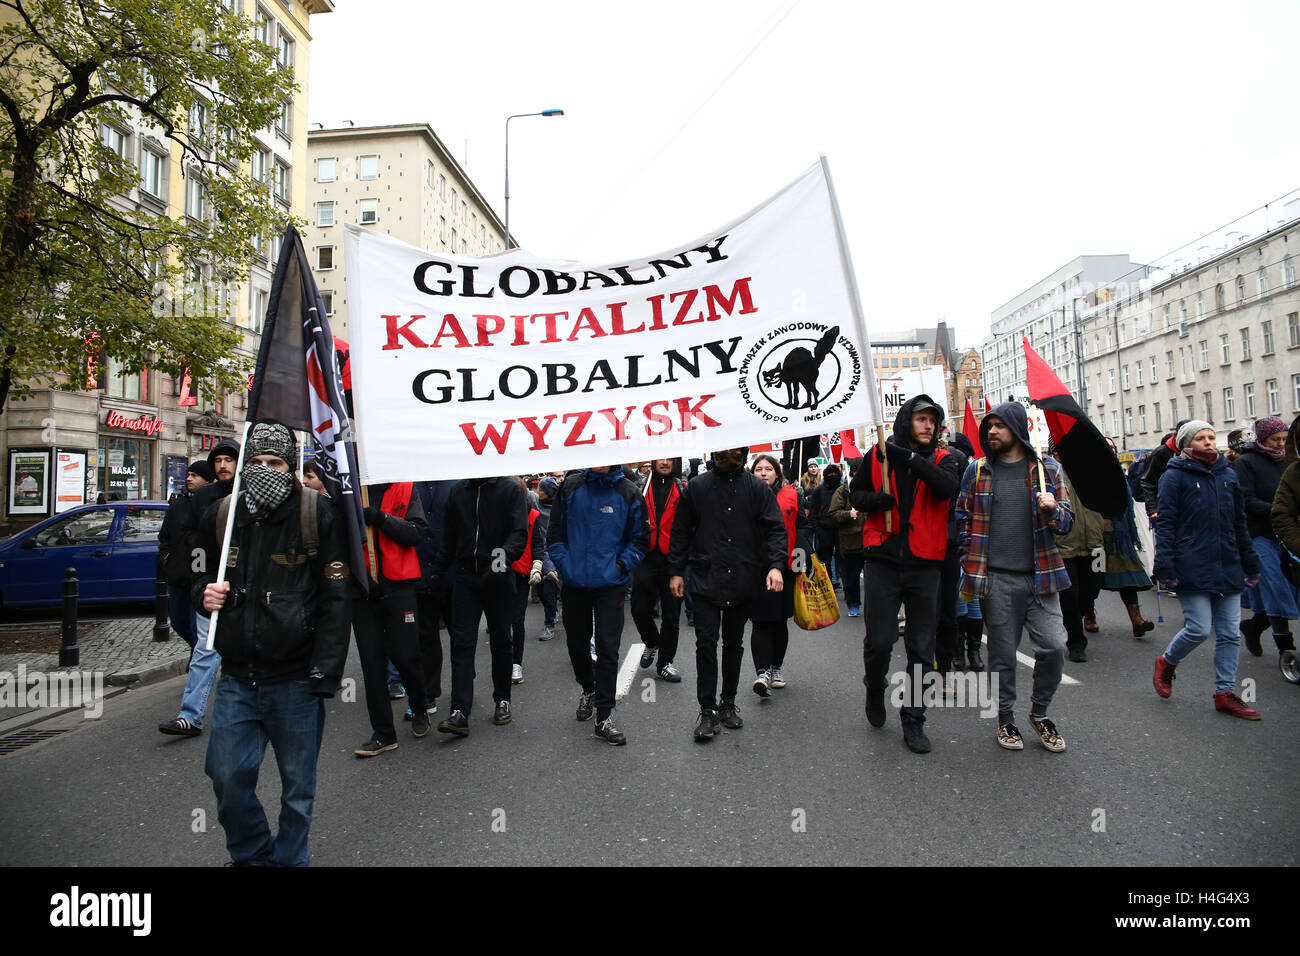 Poland, Warsaw, 15th October 2016: Thousands of protesters of NGOs, parties and Antifa marched against TTIP and CETA after a manifestation in front of the Ministry of Agriculture and Rural Development. Pawel Kukiz, band member of Piersi and founder of the Kukiz´15 party, held a speech. Far right protesters were divided by the police of the left wing of the demonstration. Credit: Jake Ratz/Alamy Live News Stock Photo